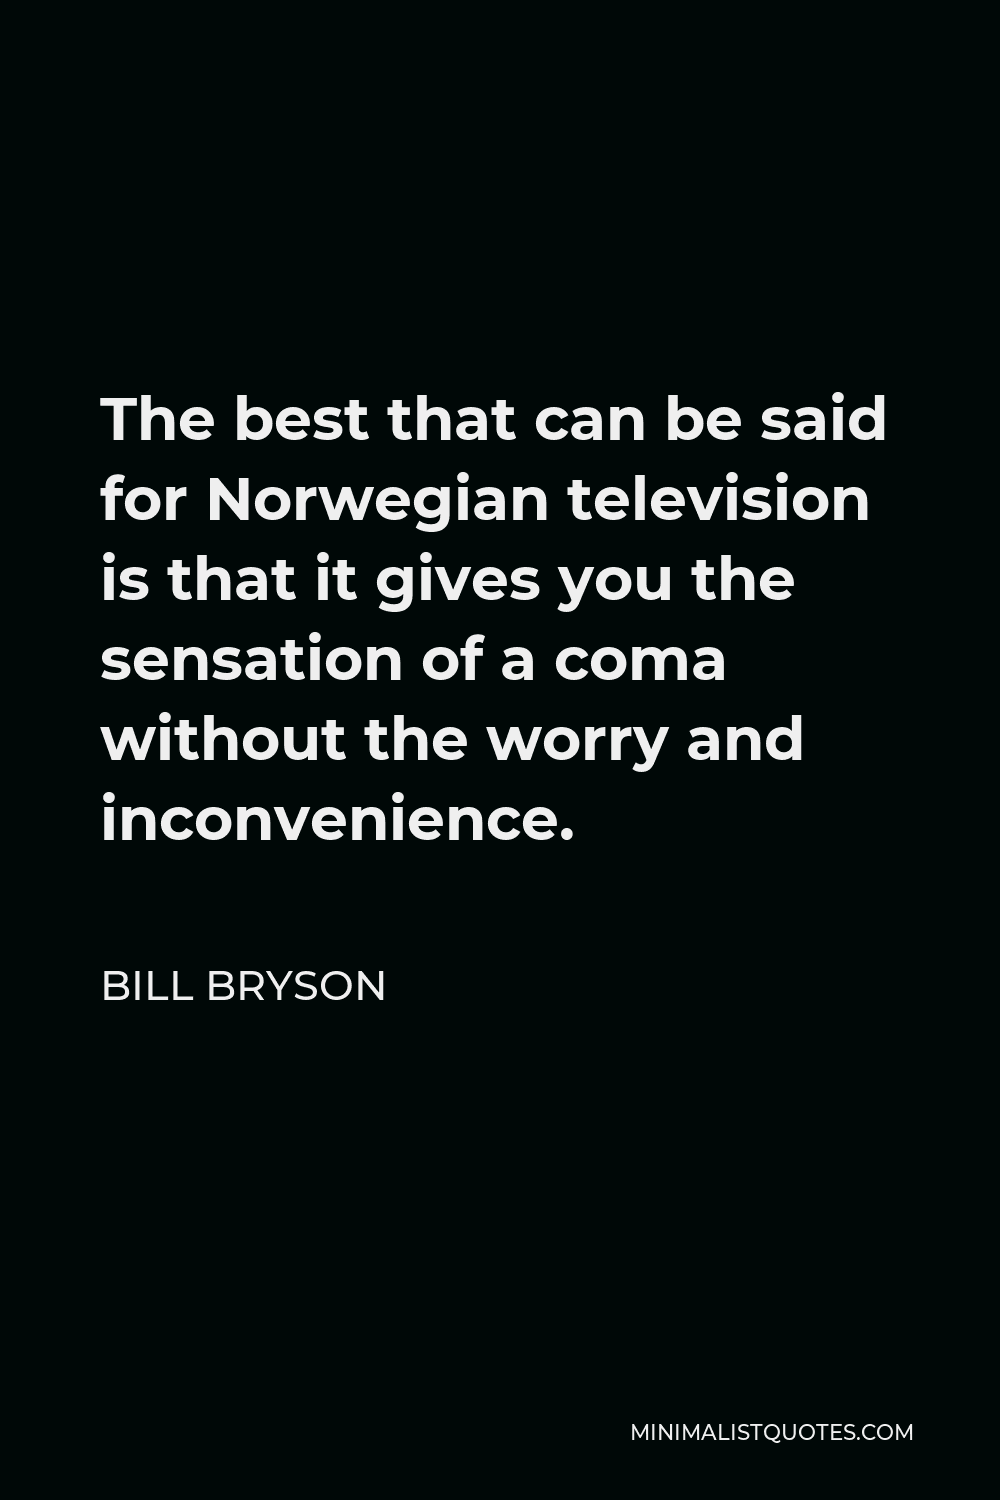 Bill Bryson Quote - The best that can be said for Norwegian television is that it gives you the sensation of a coma without the worry and inconvenience.